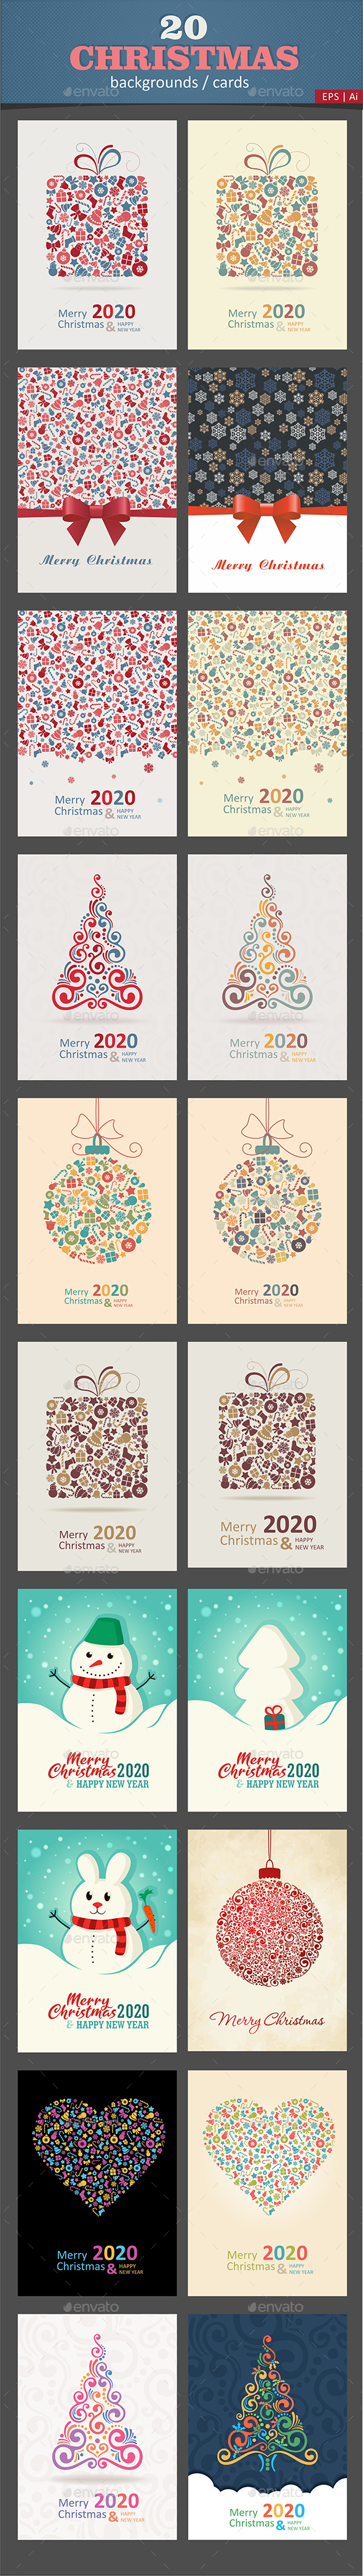 20 Christmas Cards / Backgrounds Vector